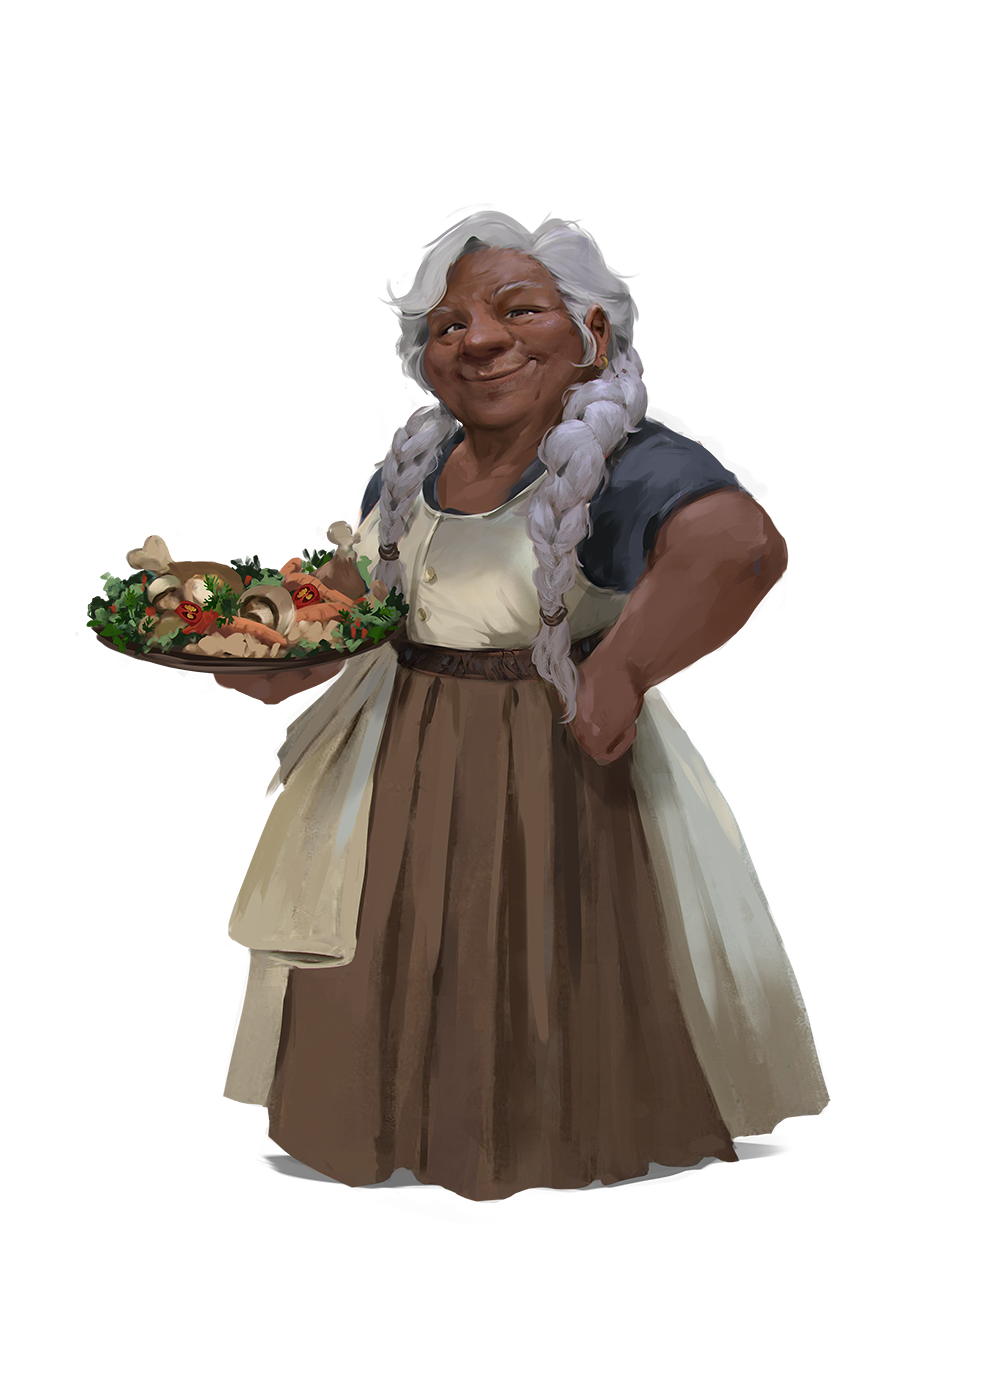 An older dwarven woman with dark skin. She’s holding a plate of food and looks kind and caring